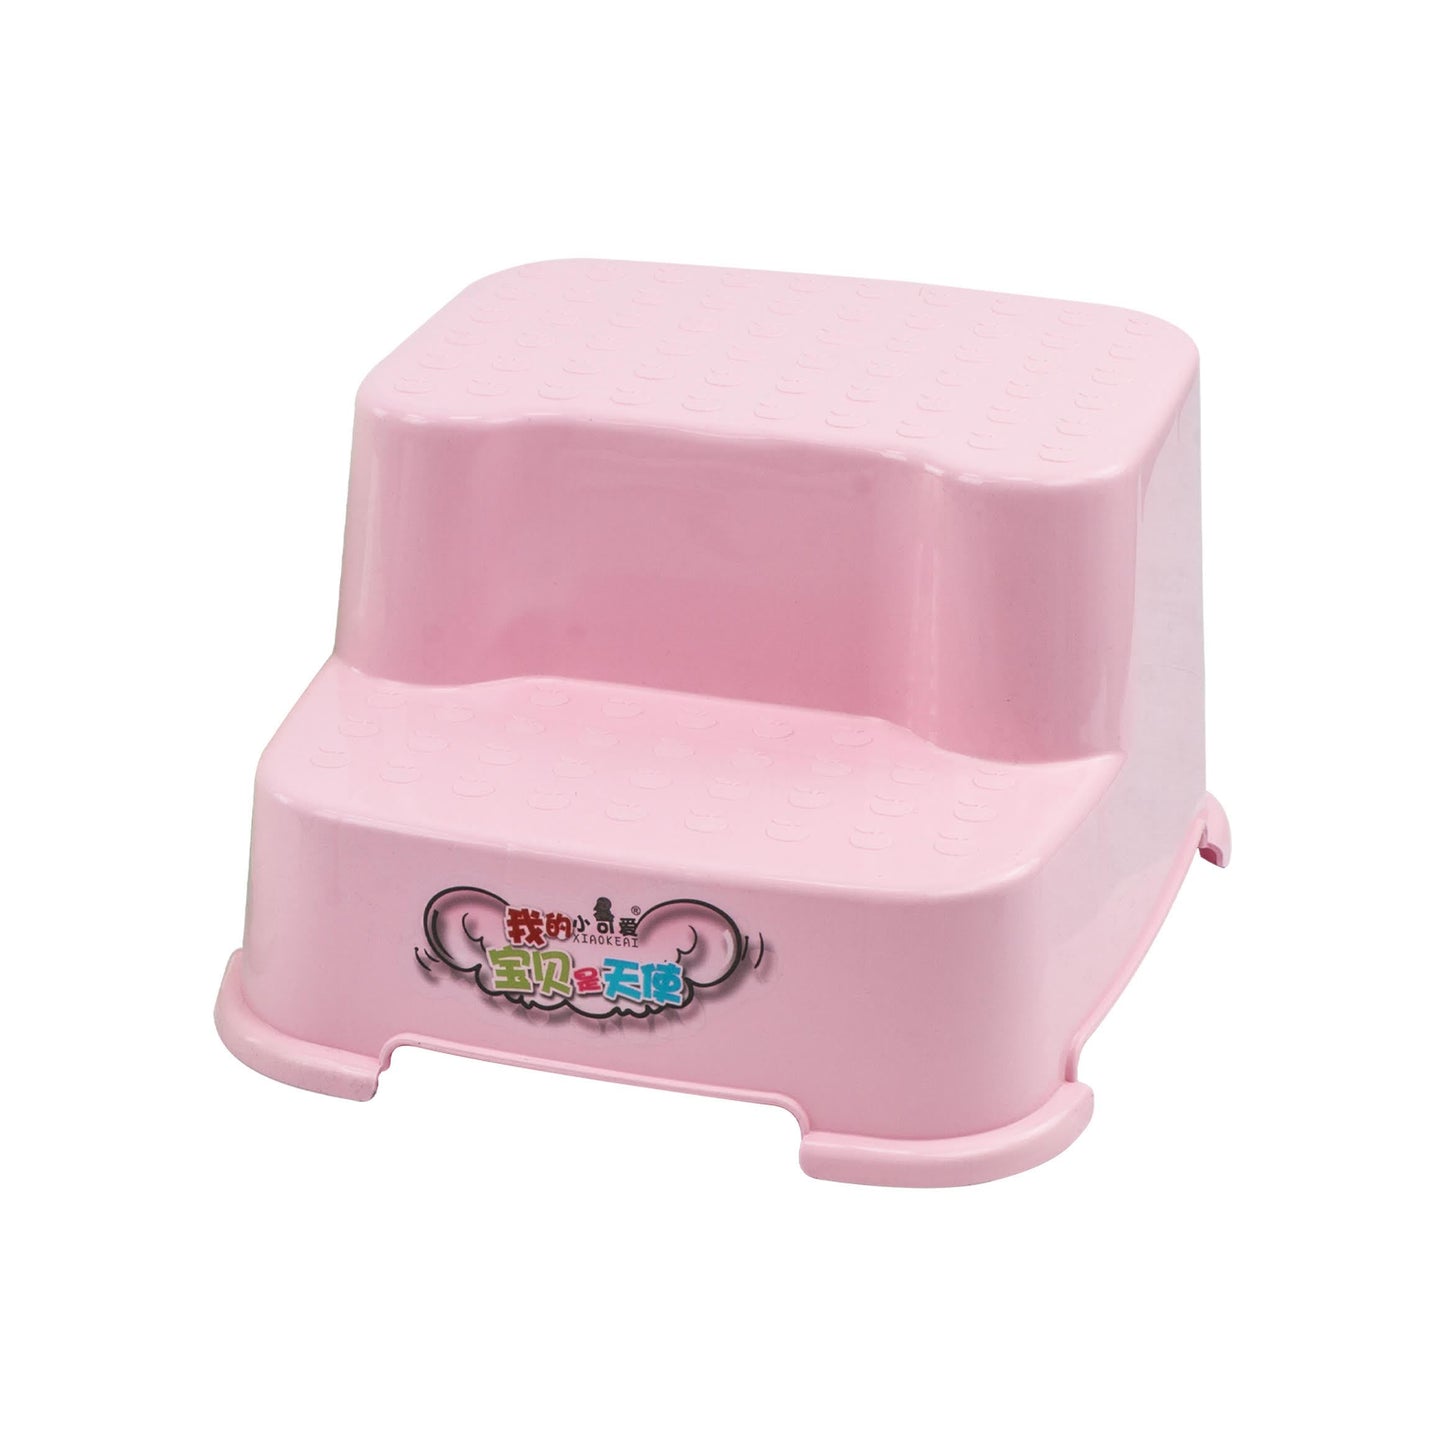 Plastic Pink Step Stool Home Garden Indoor Outdoor Stepping Tool 9121 A  (Parcel Rate)